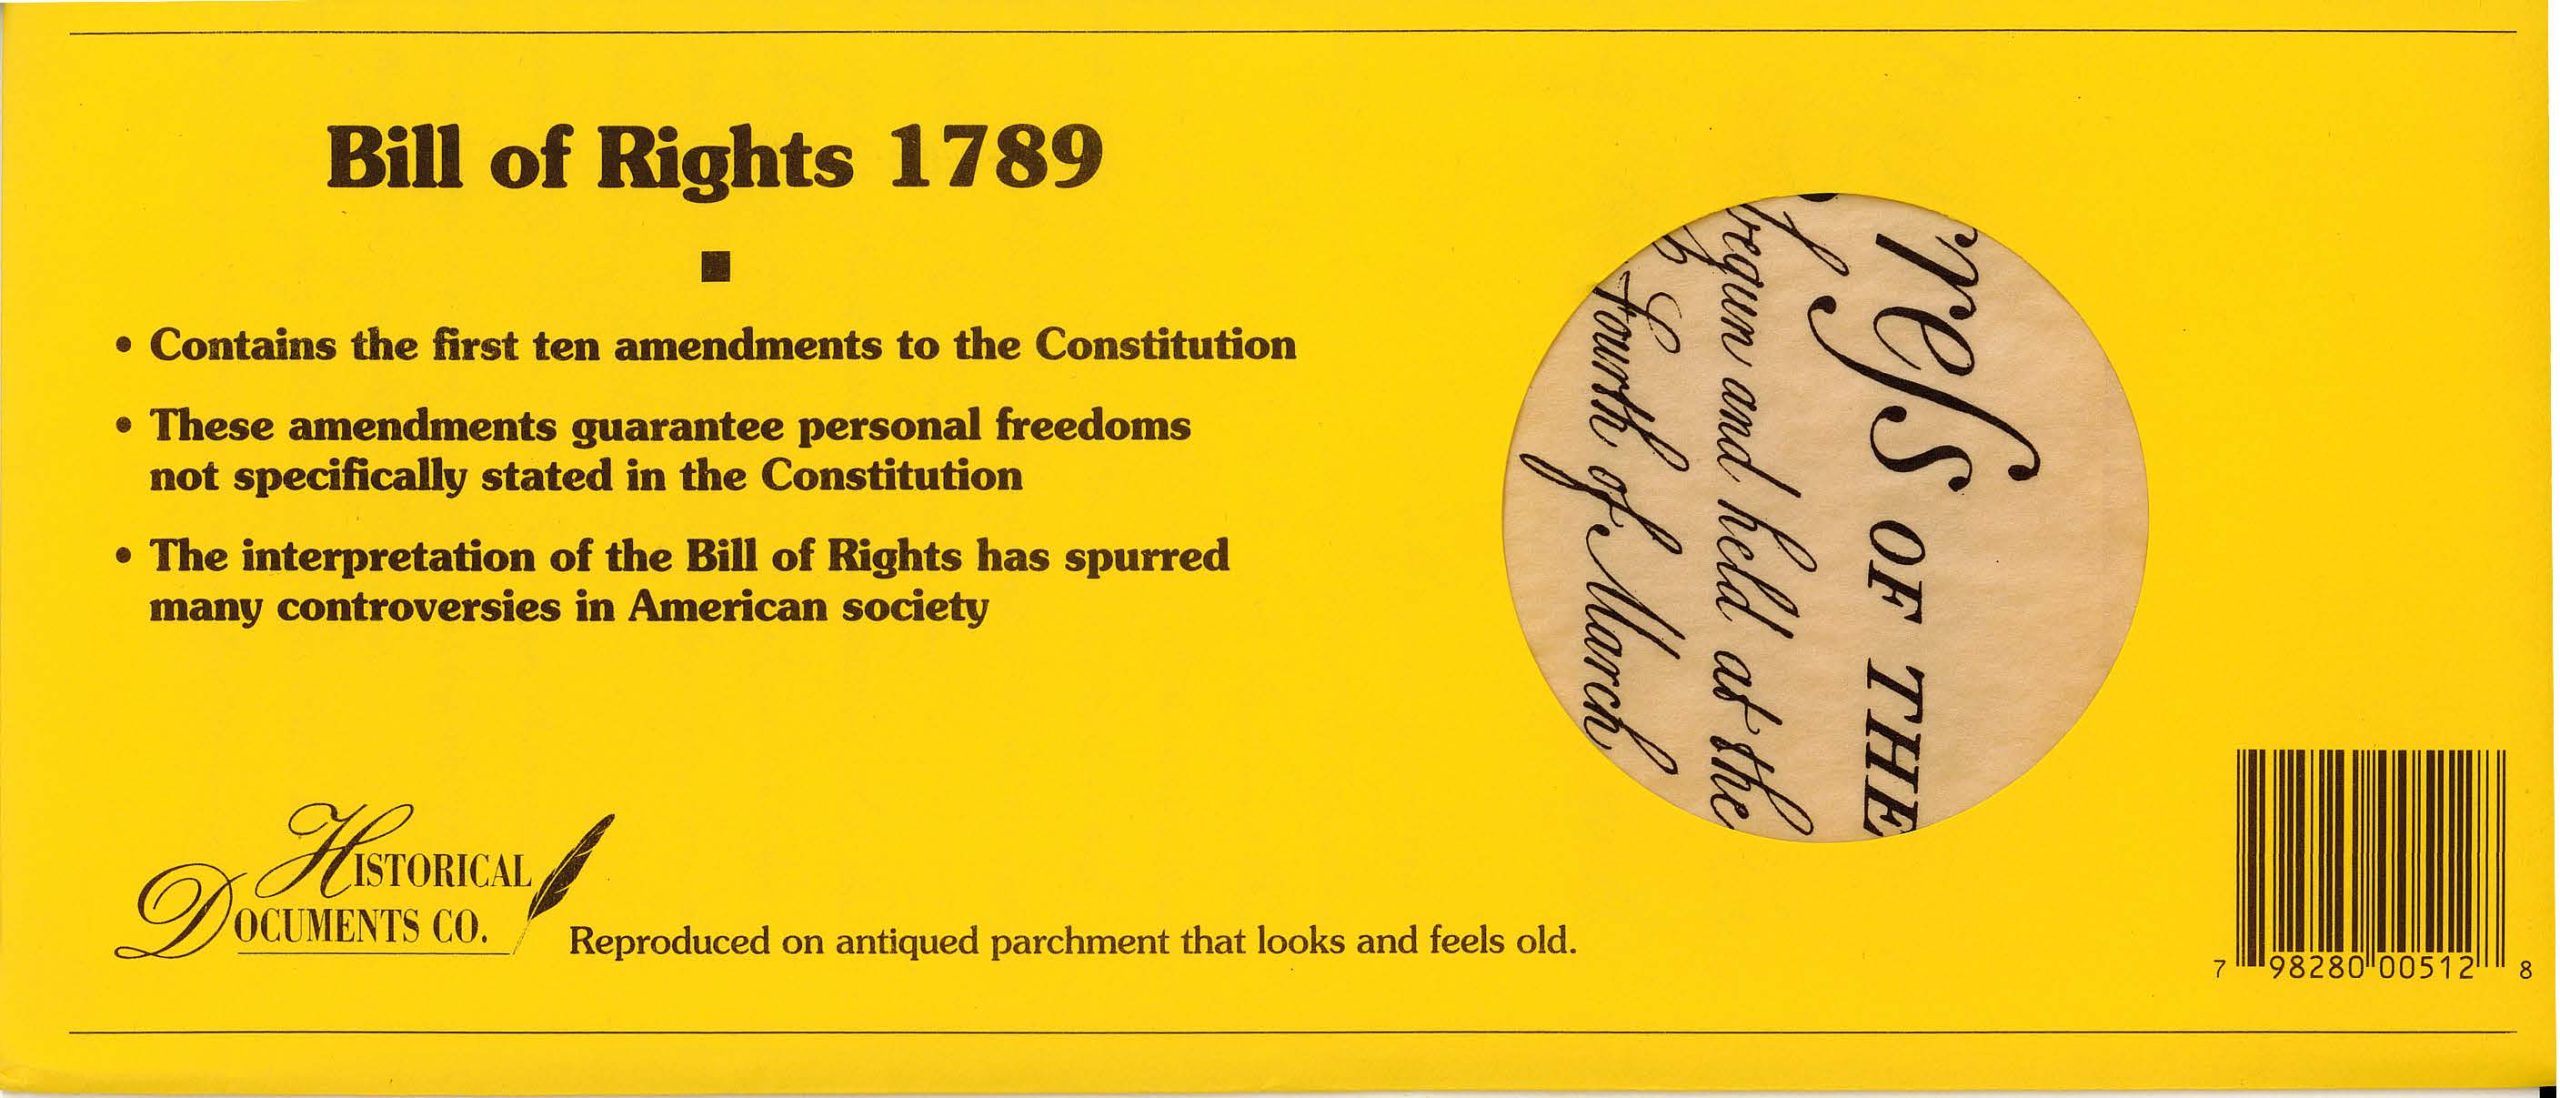 Documents- Bill of Rights 1789